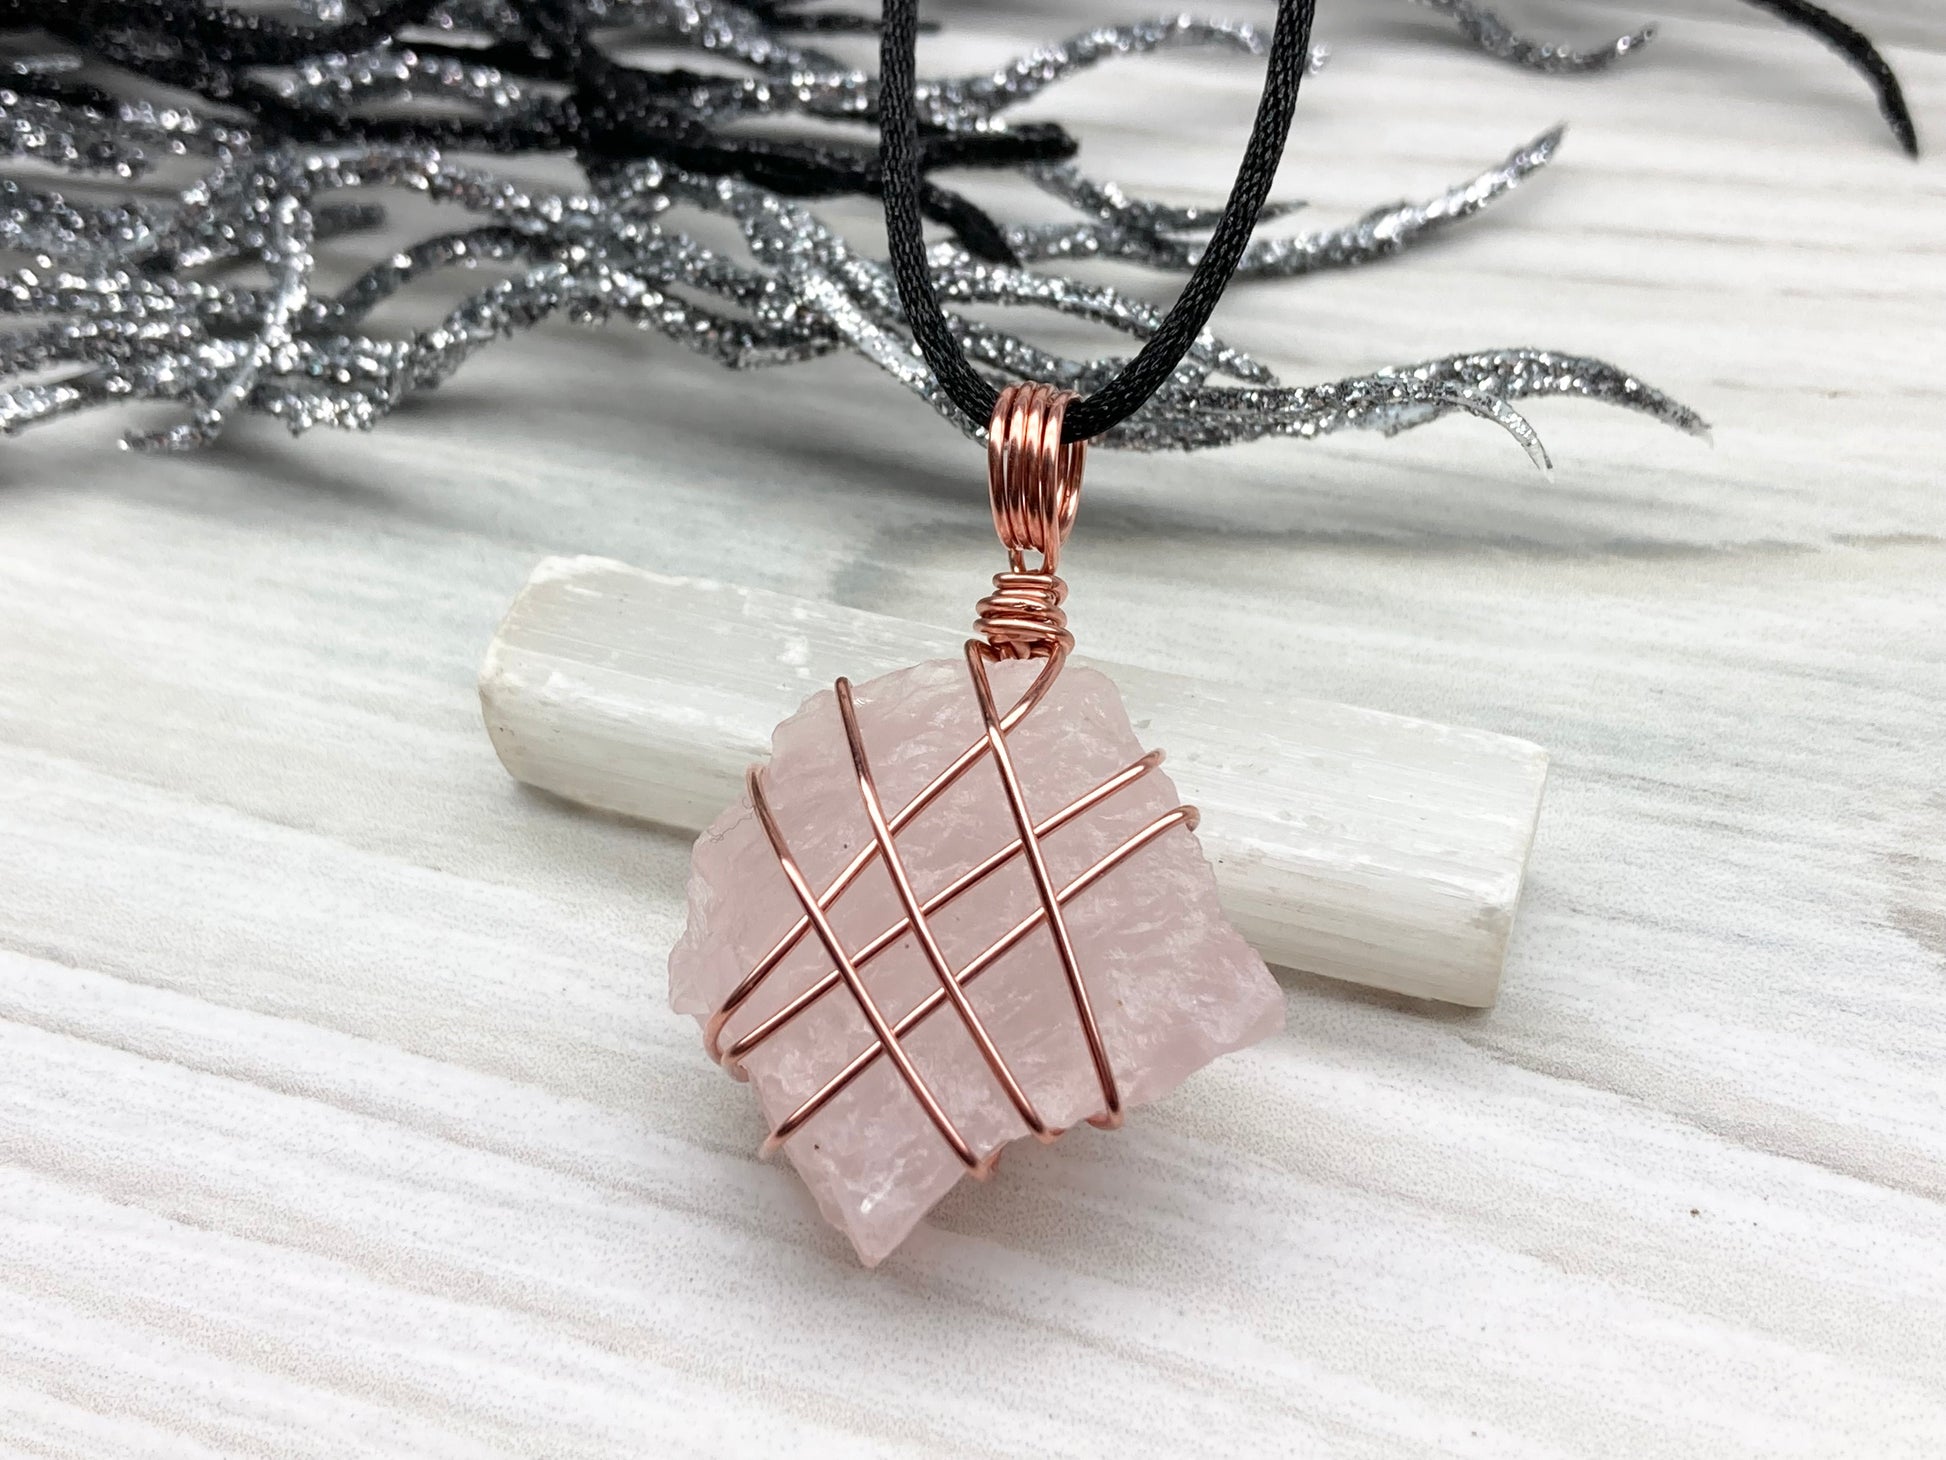 Raw Rose Quartz Necklace. Light Pink Crystal Hand Wrapped With Copper Wire. Comes On A Black Chain. Libra Zodiac Stone Jewelry. Spiritual New Age Style.